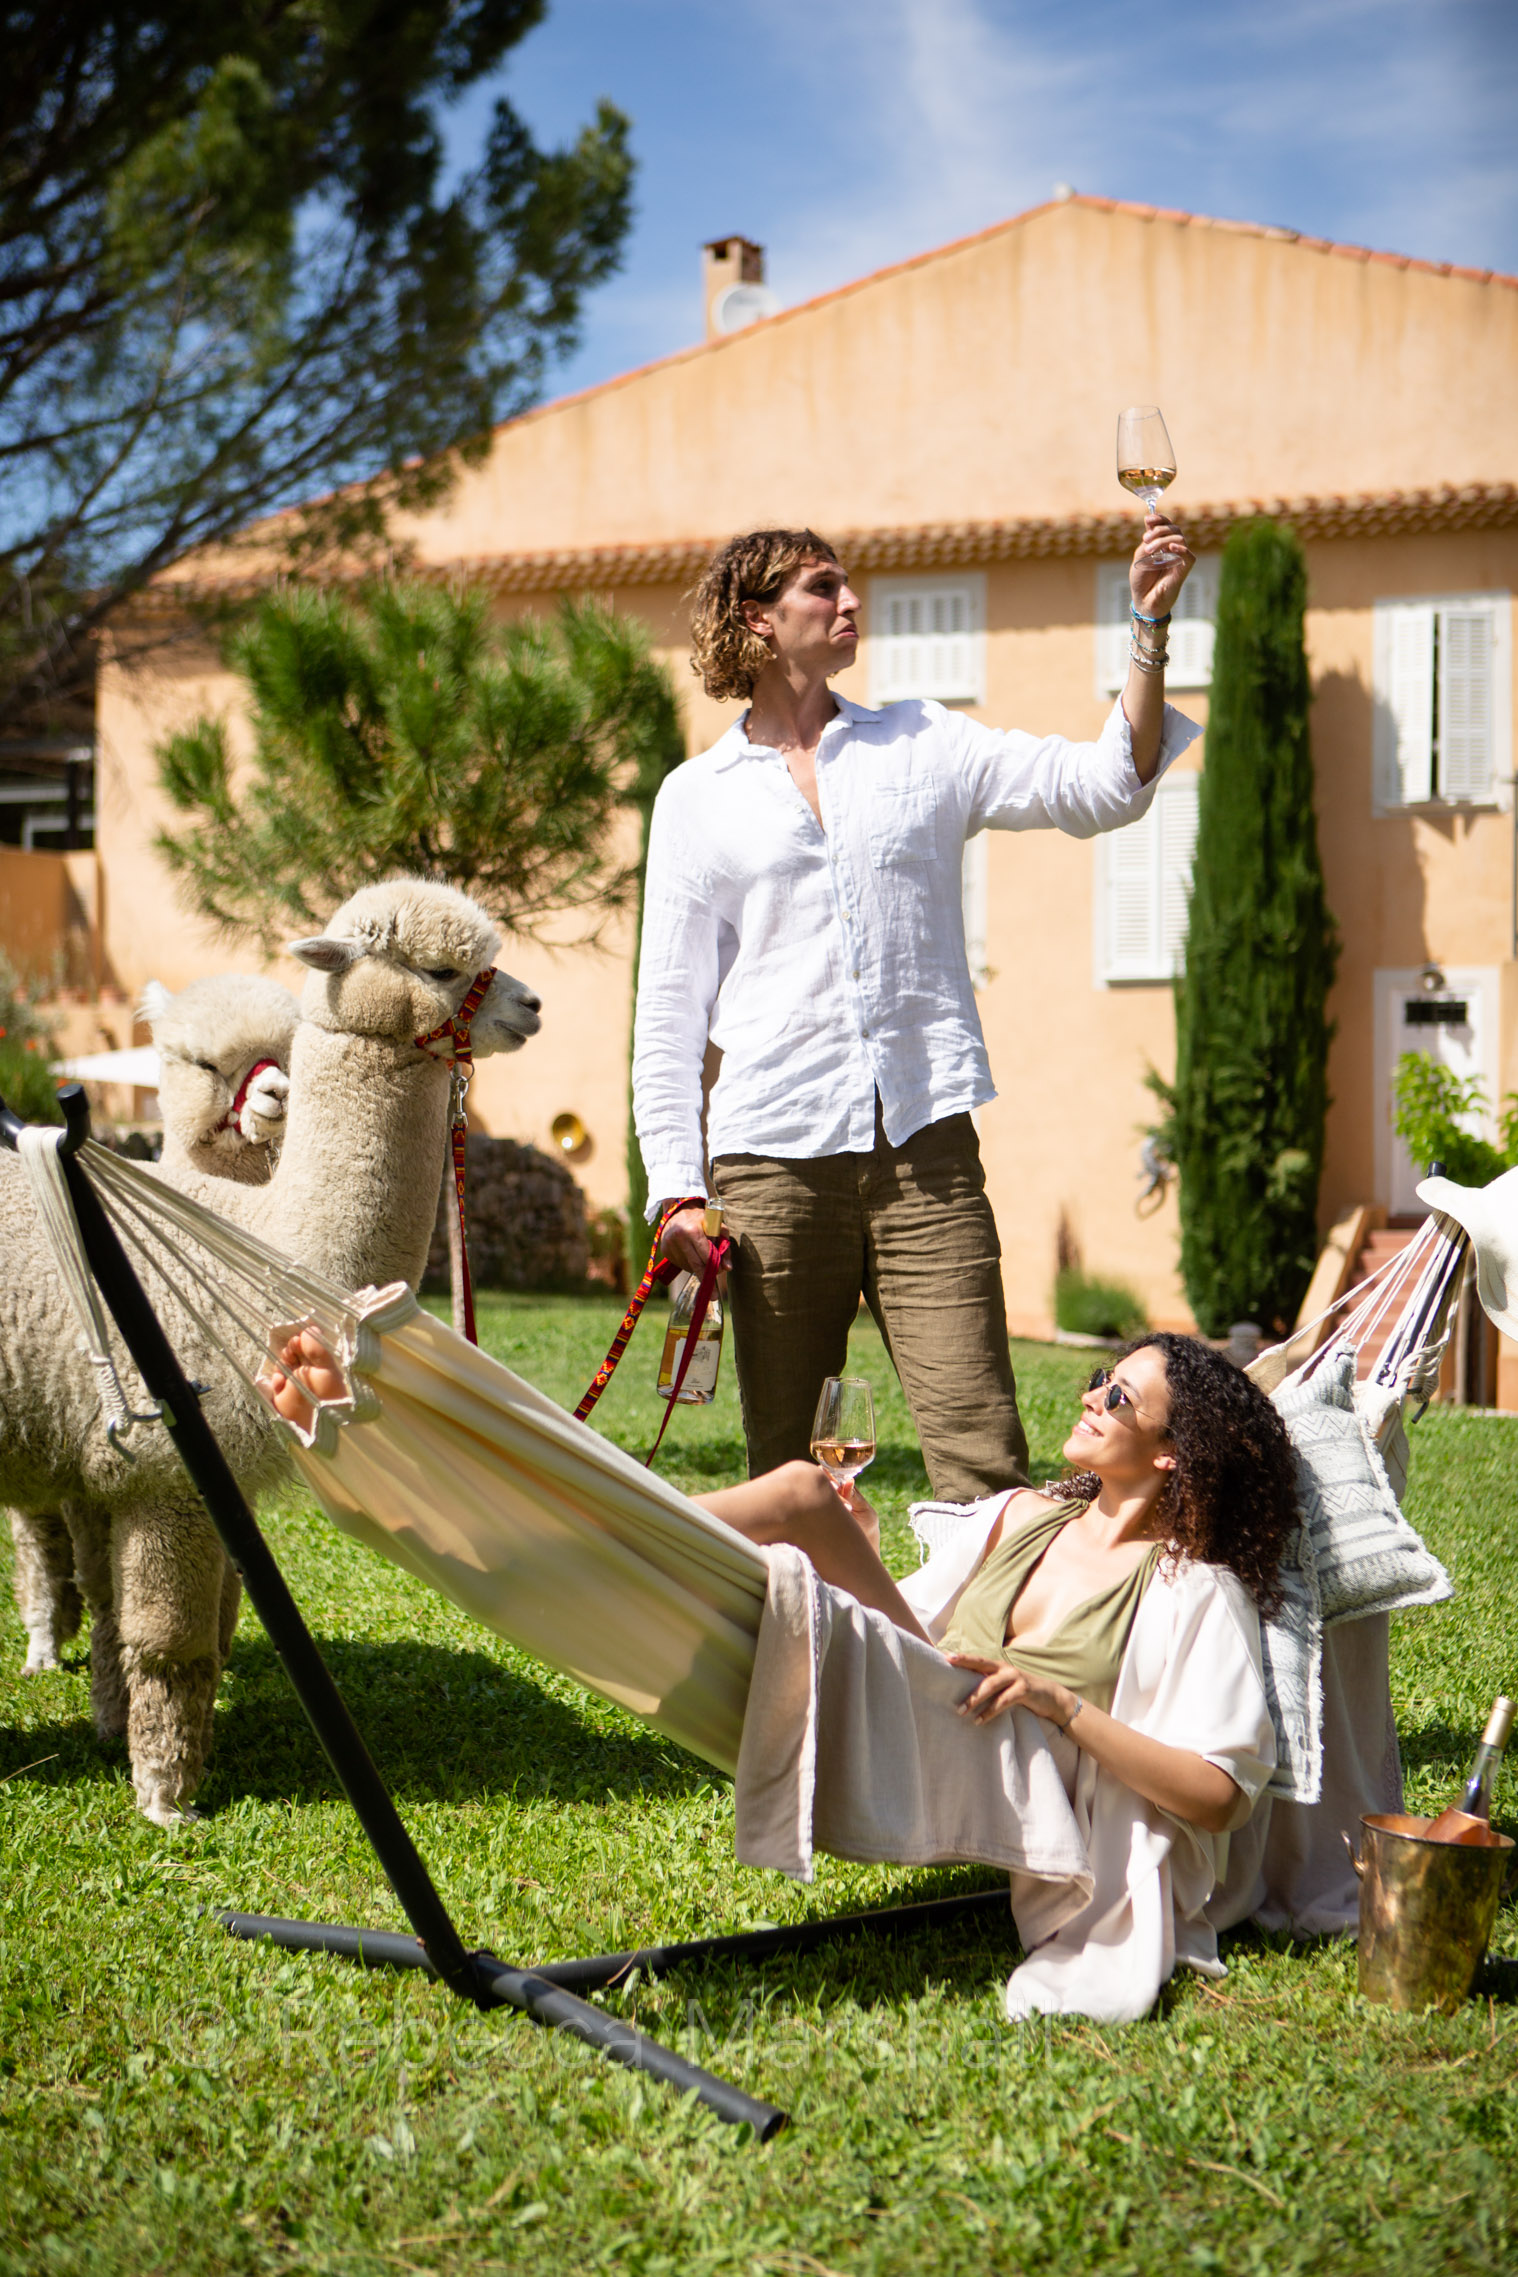 A couple drink wine on the lawn with two pet llamas